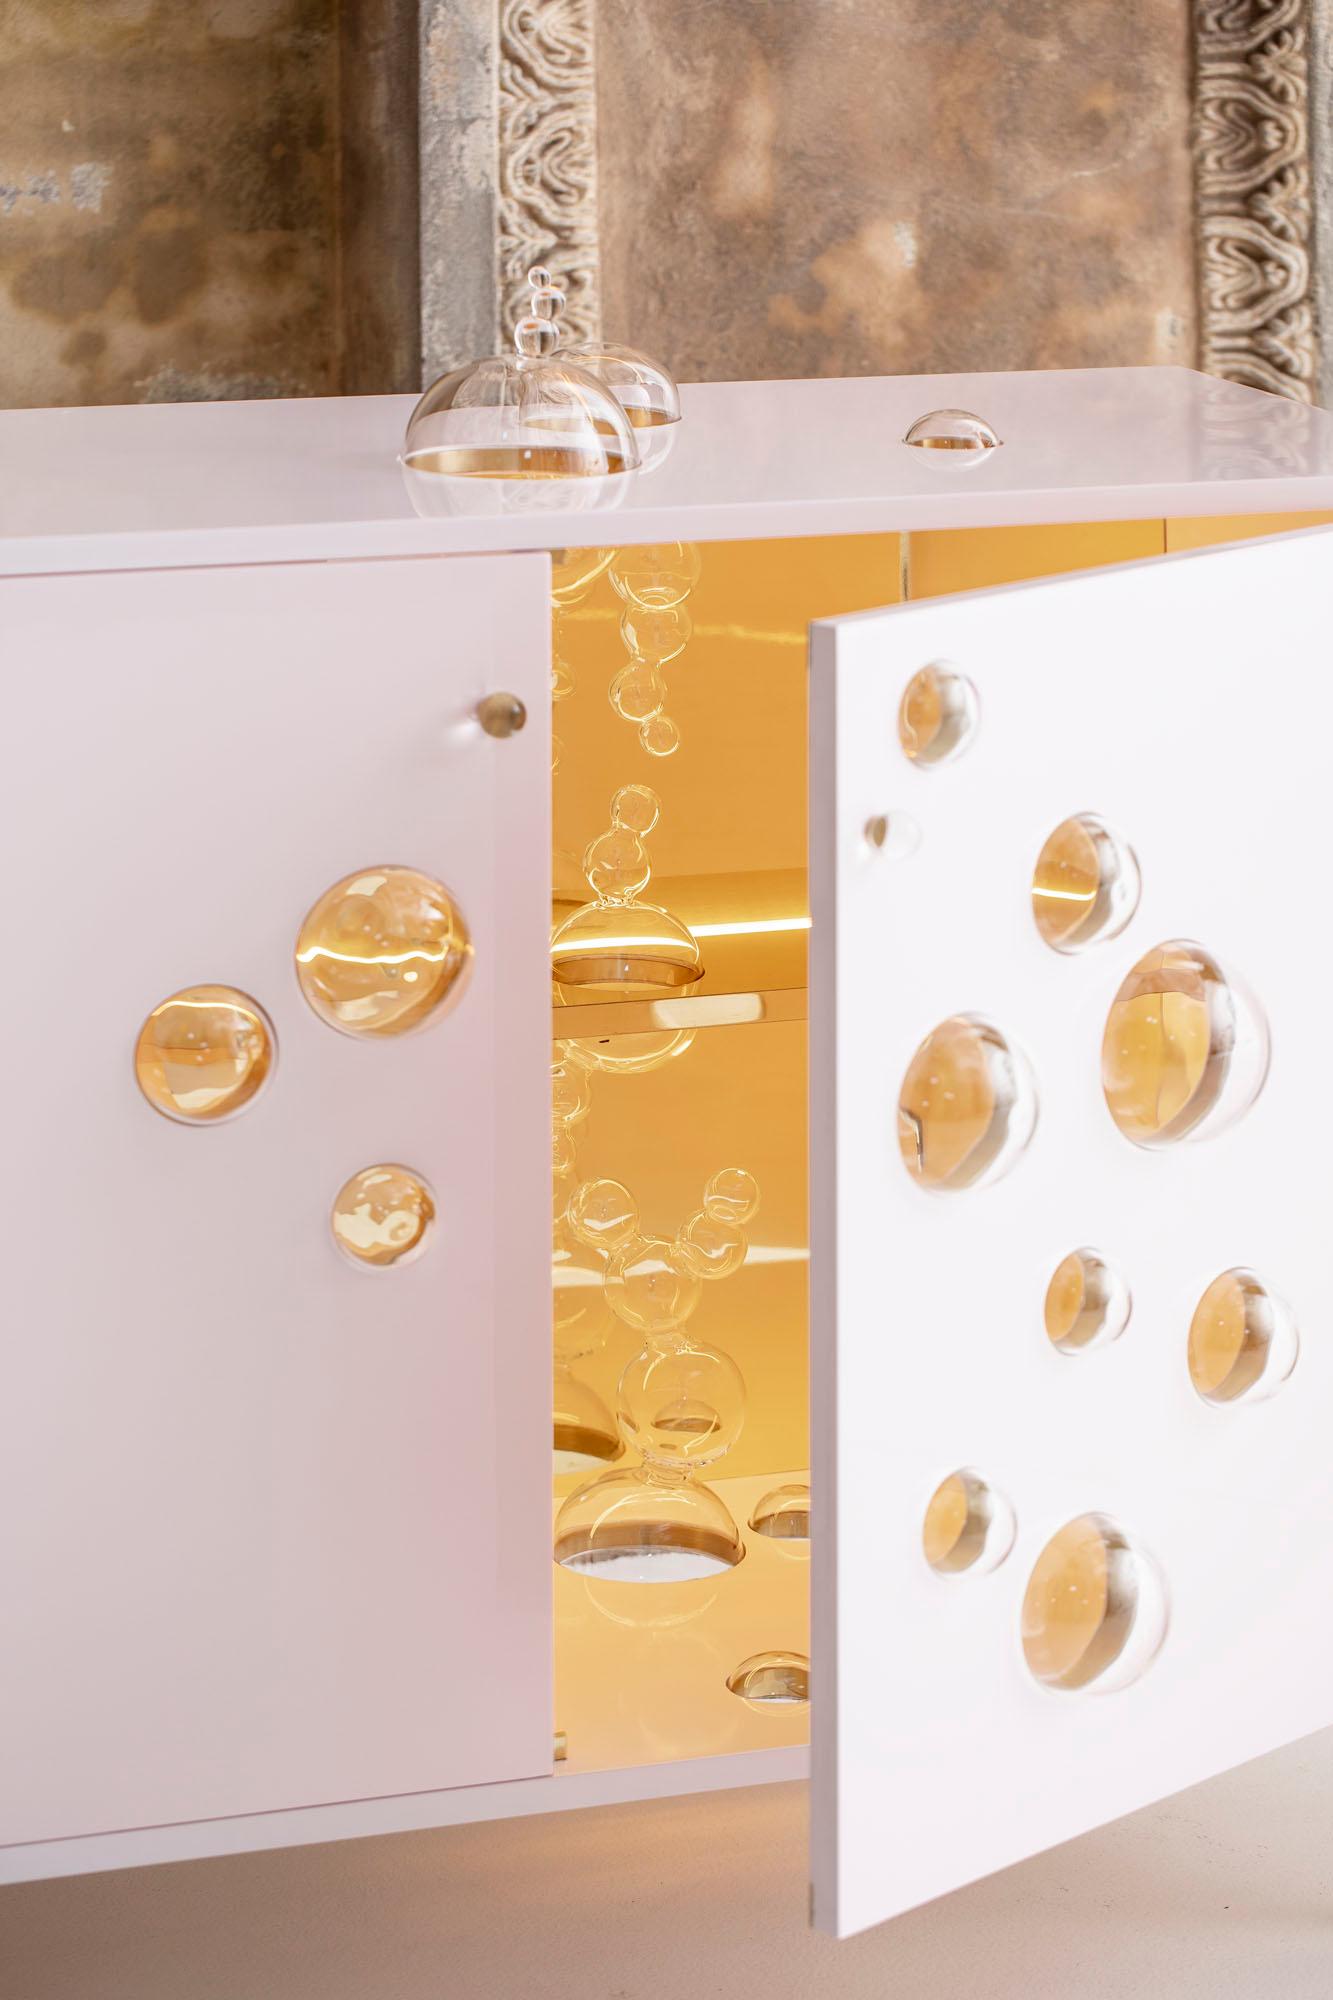 Sparkling cabinet is a one-of-a-kind- project in which the artist ironically plays with glass creating a brilliant and original decoration.

Produced in a single piece in pink lacquered wood with brass details and borosilicate glass.
Inside there